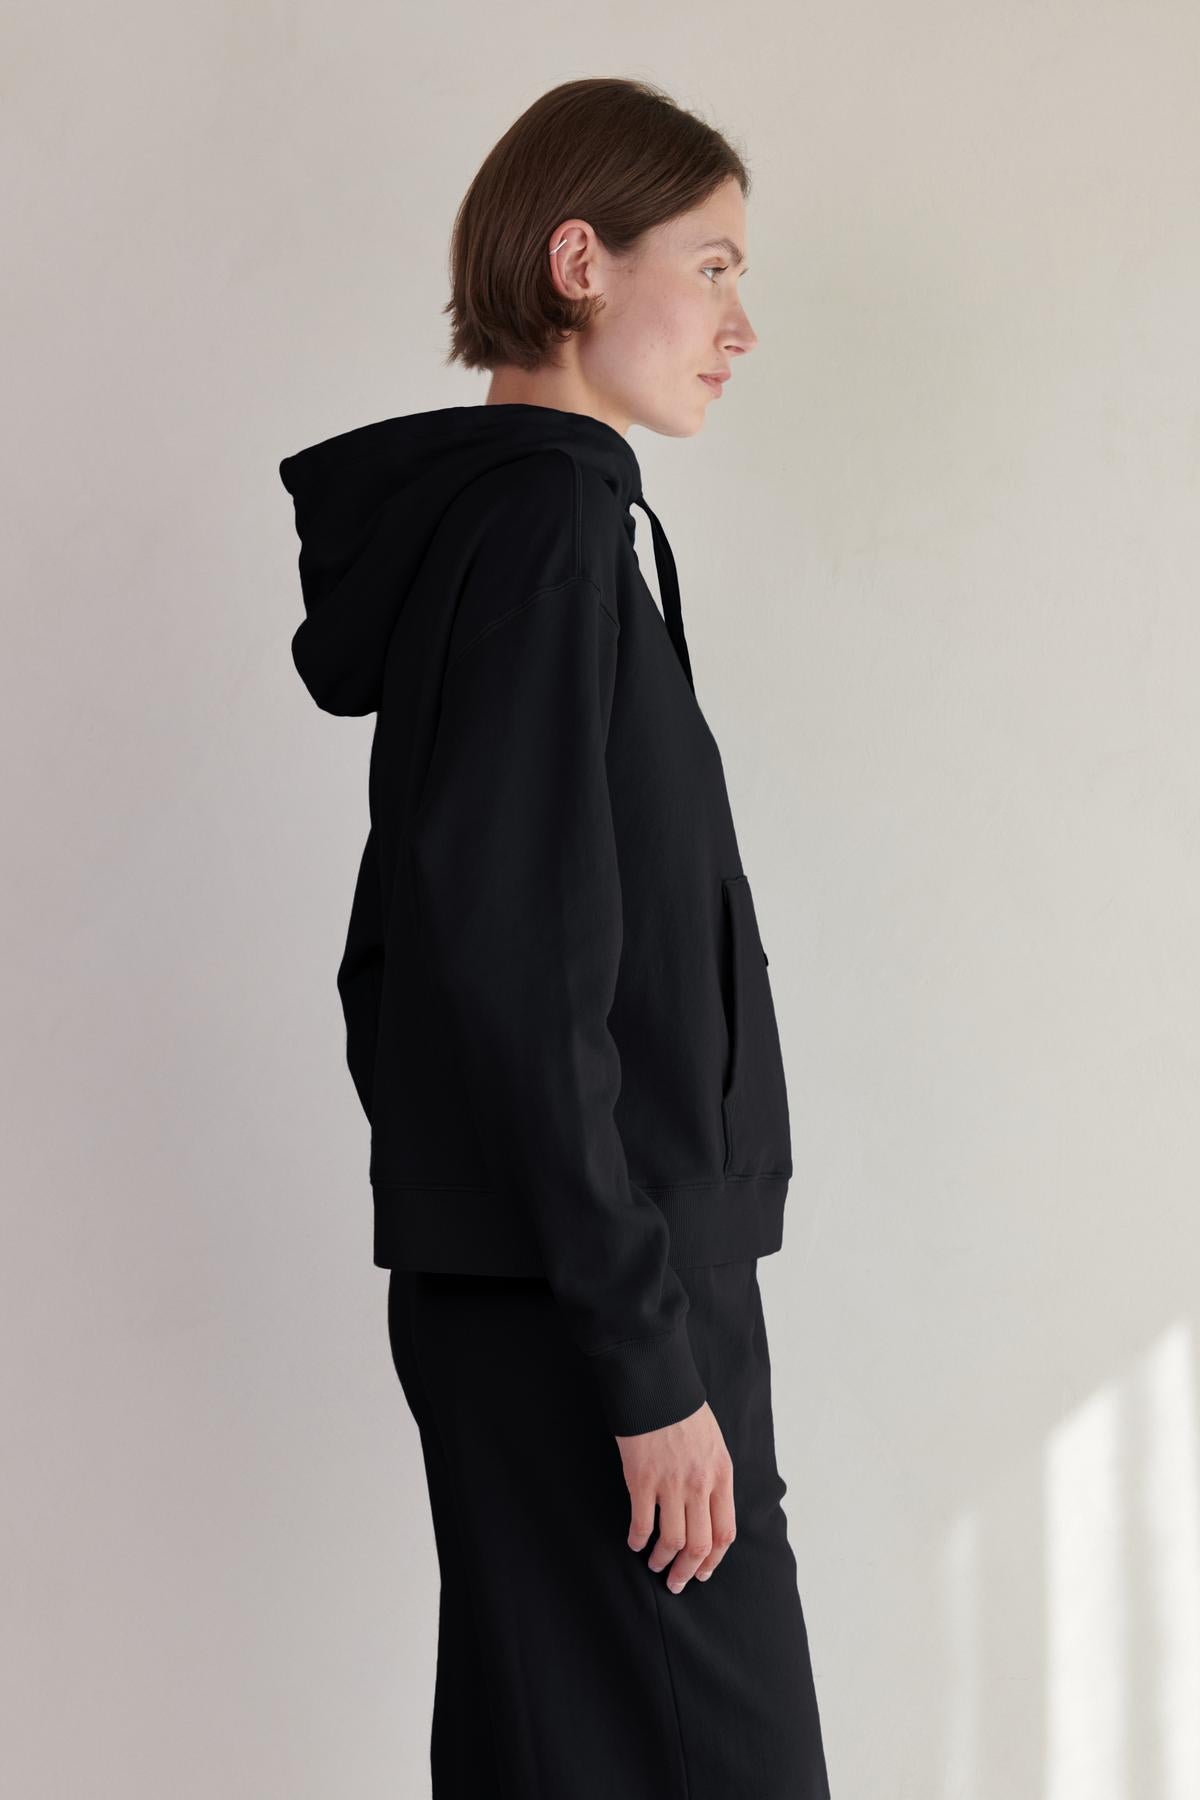   A woman wearing a black OJAI HOODIE and trousers by Velvet by Jenny Graham. 